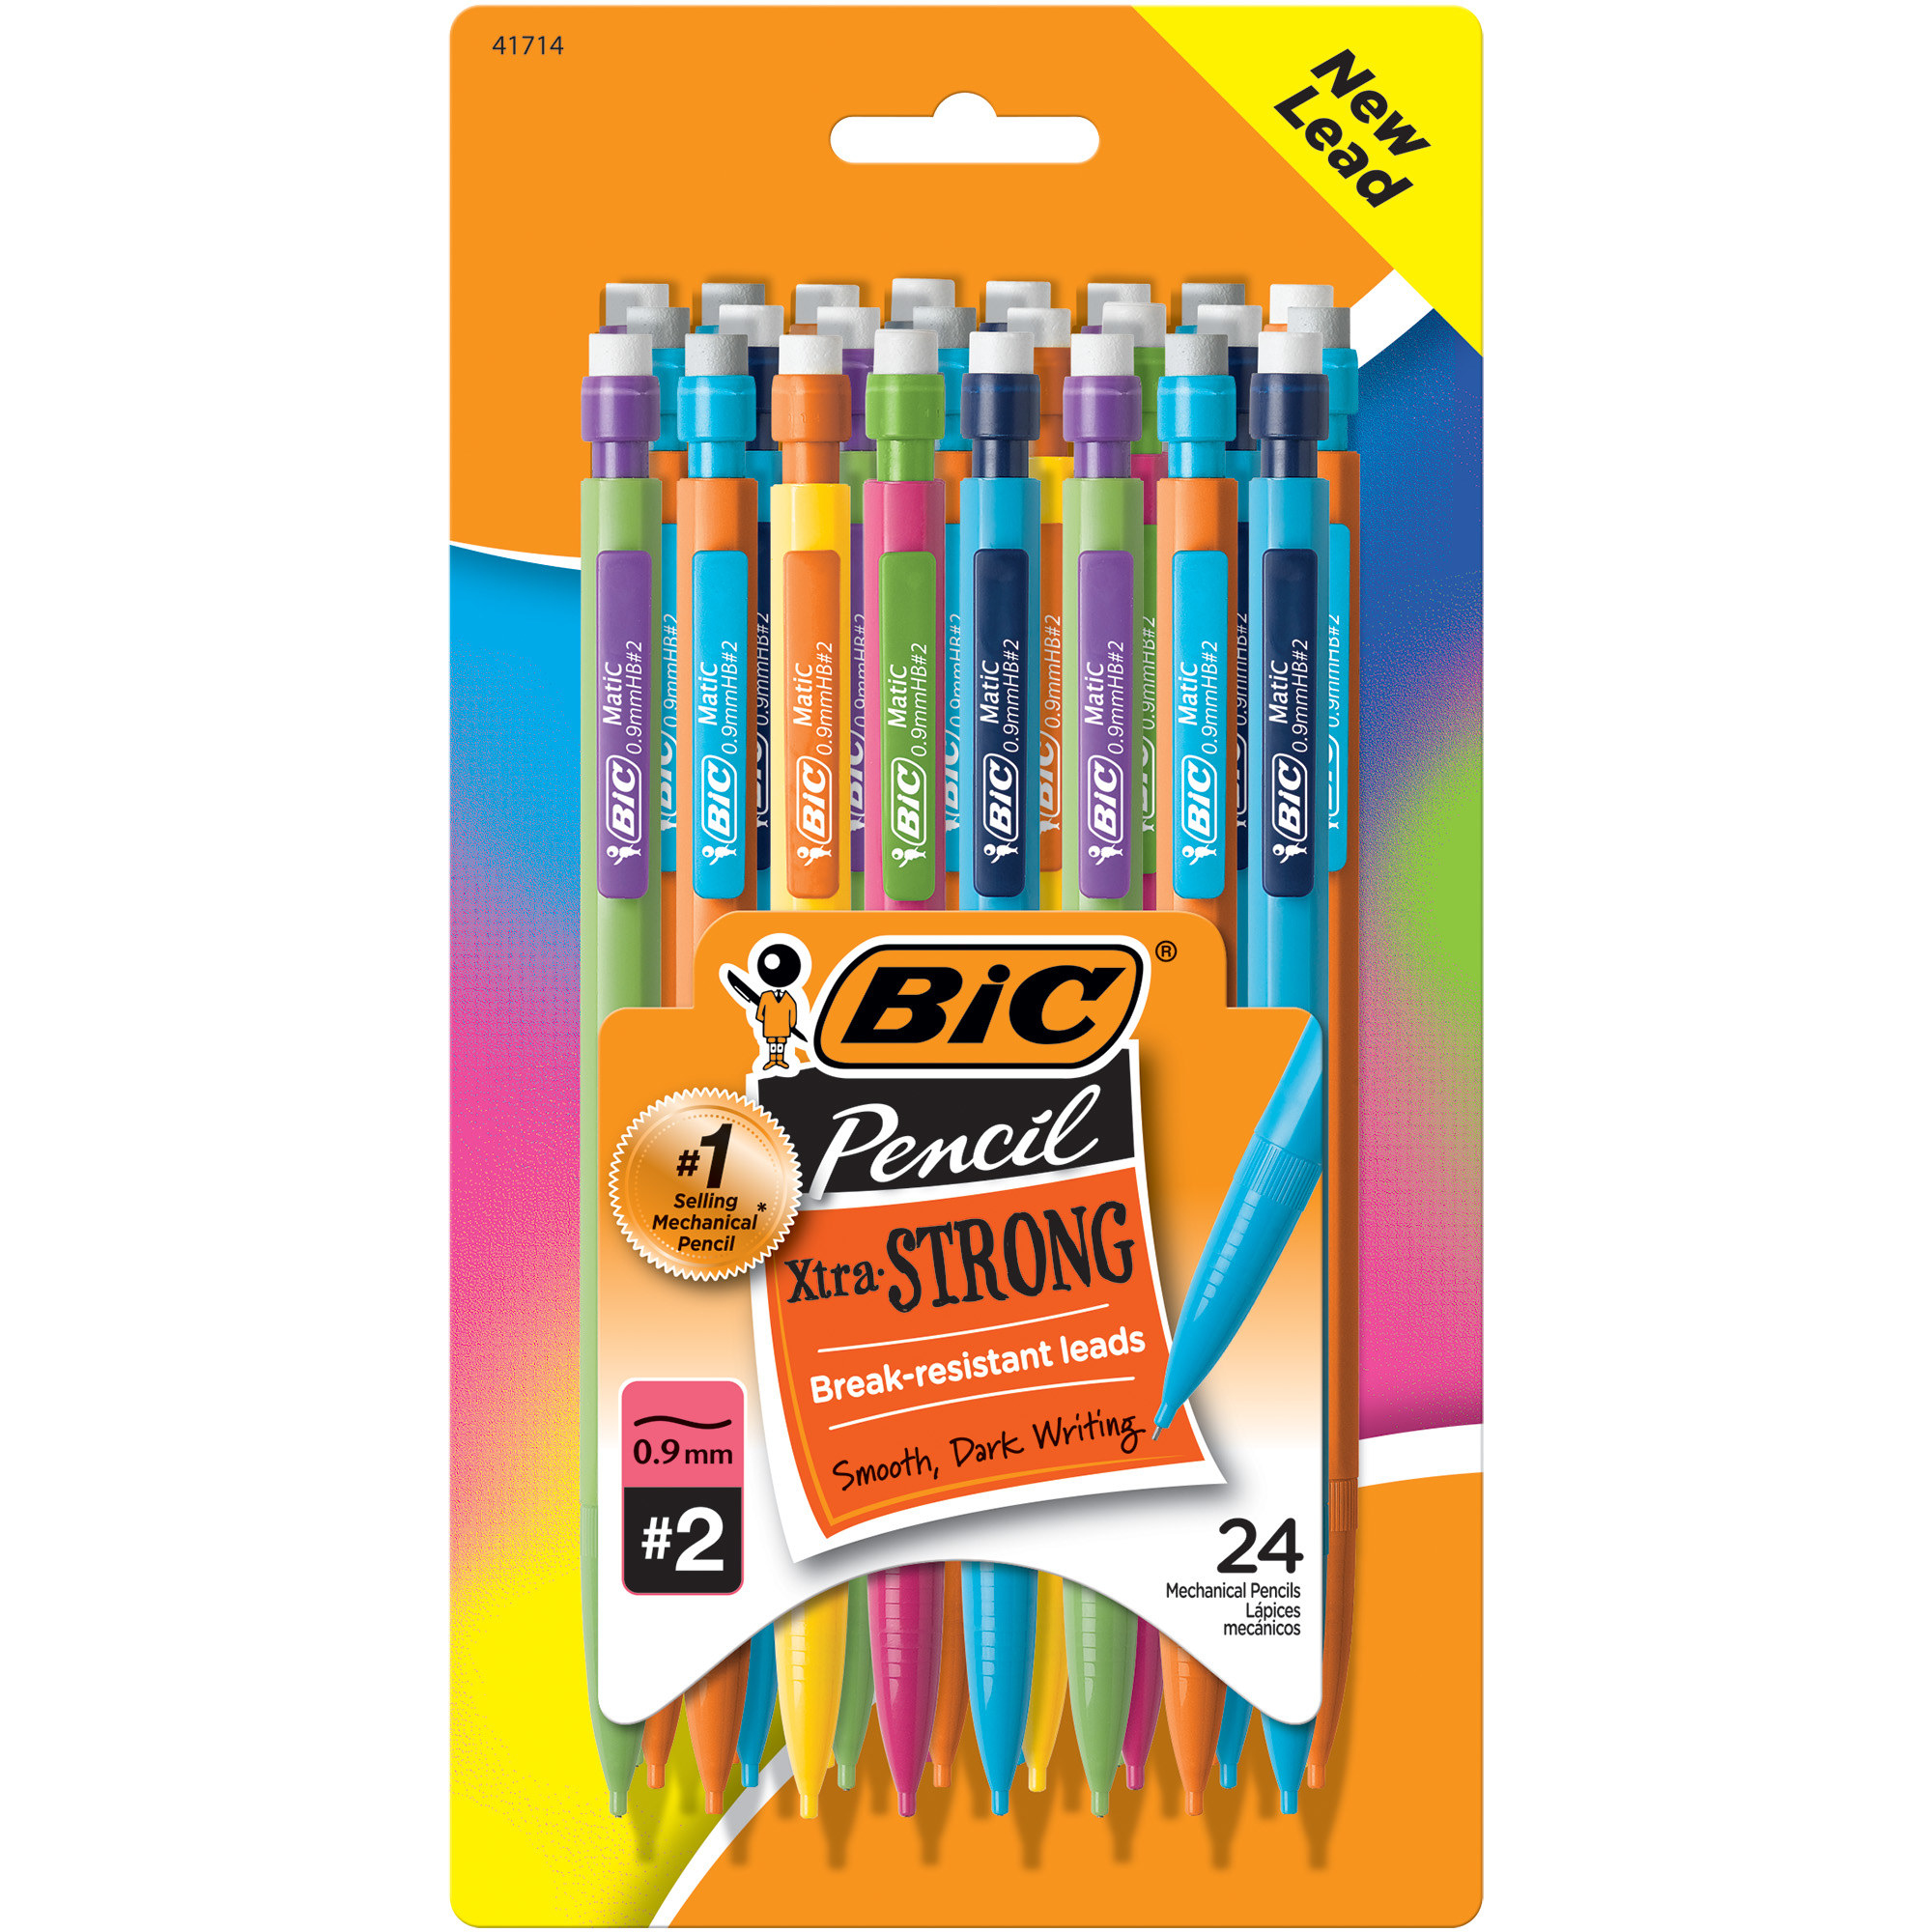 The colorful pack of pencils